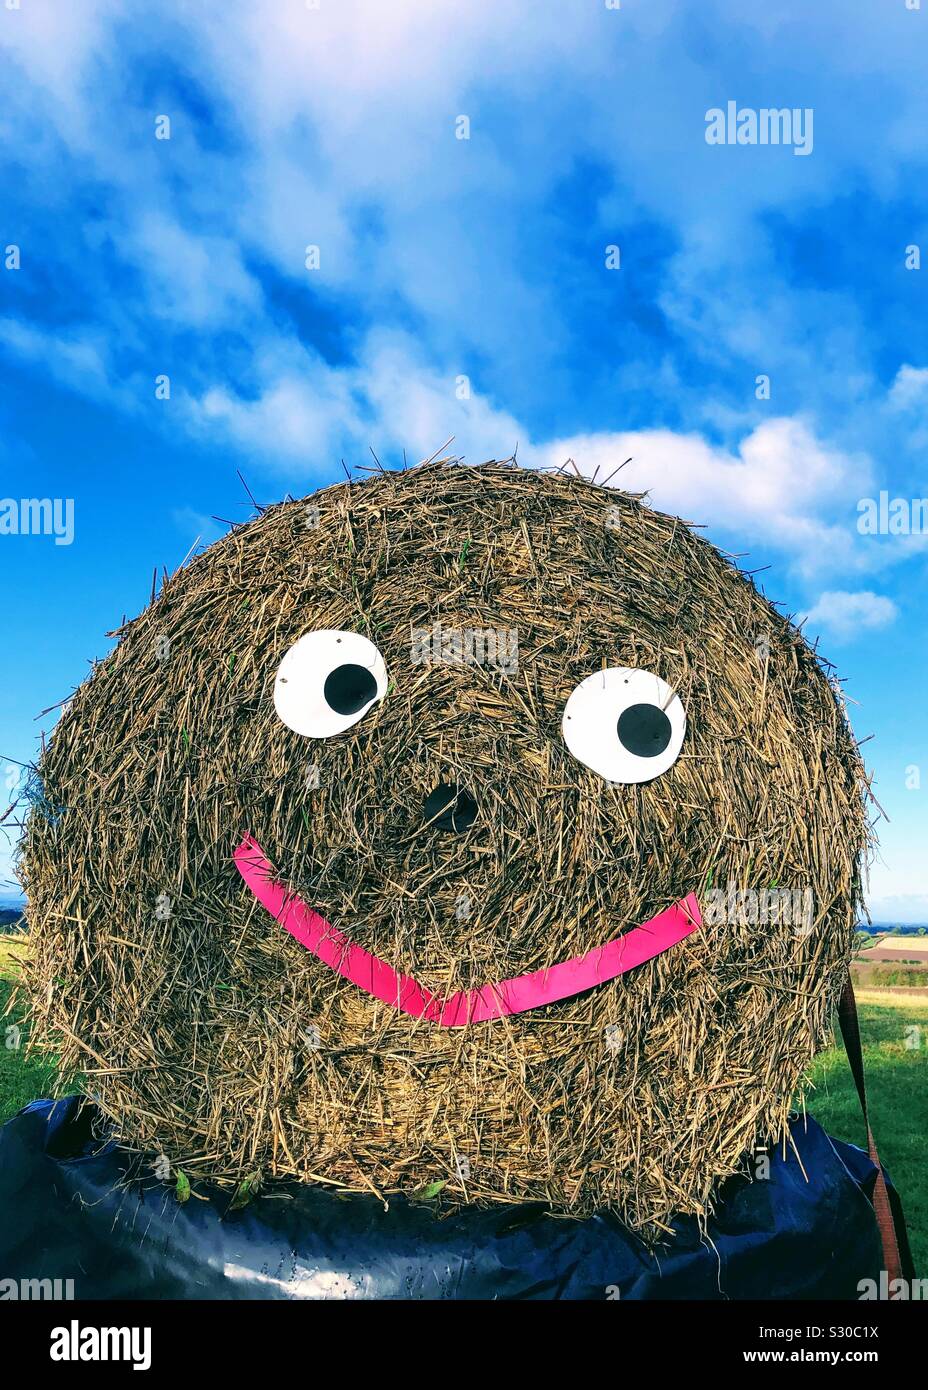 Happy face made from a straw bale, England, United Kingdom Stock Photo